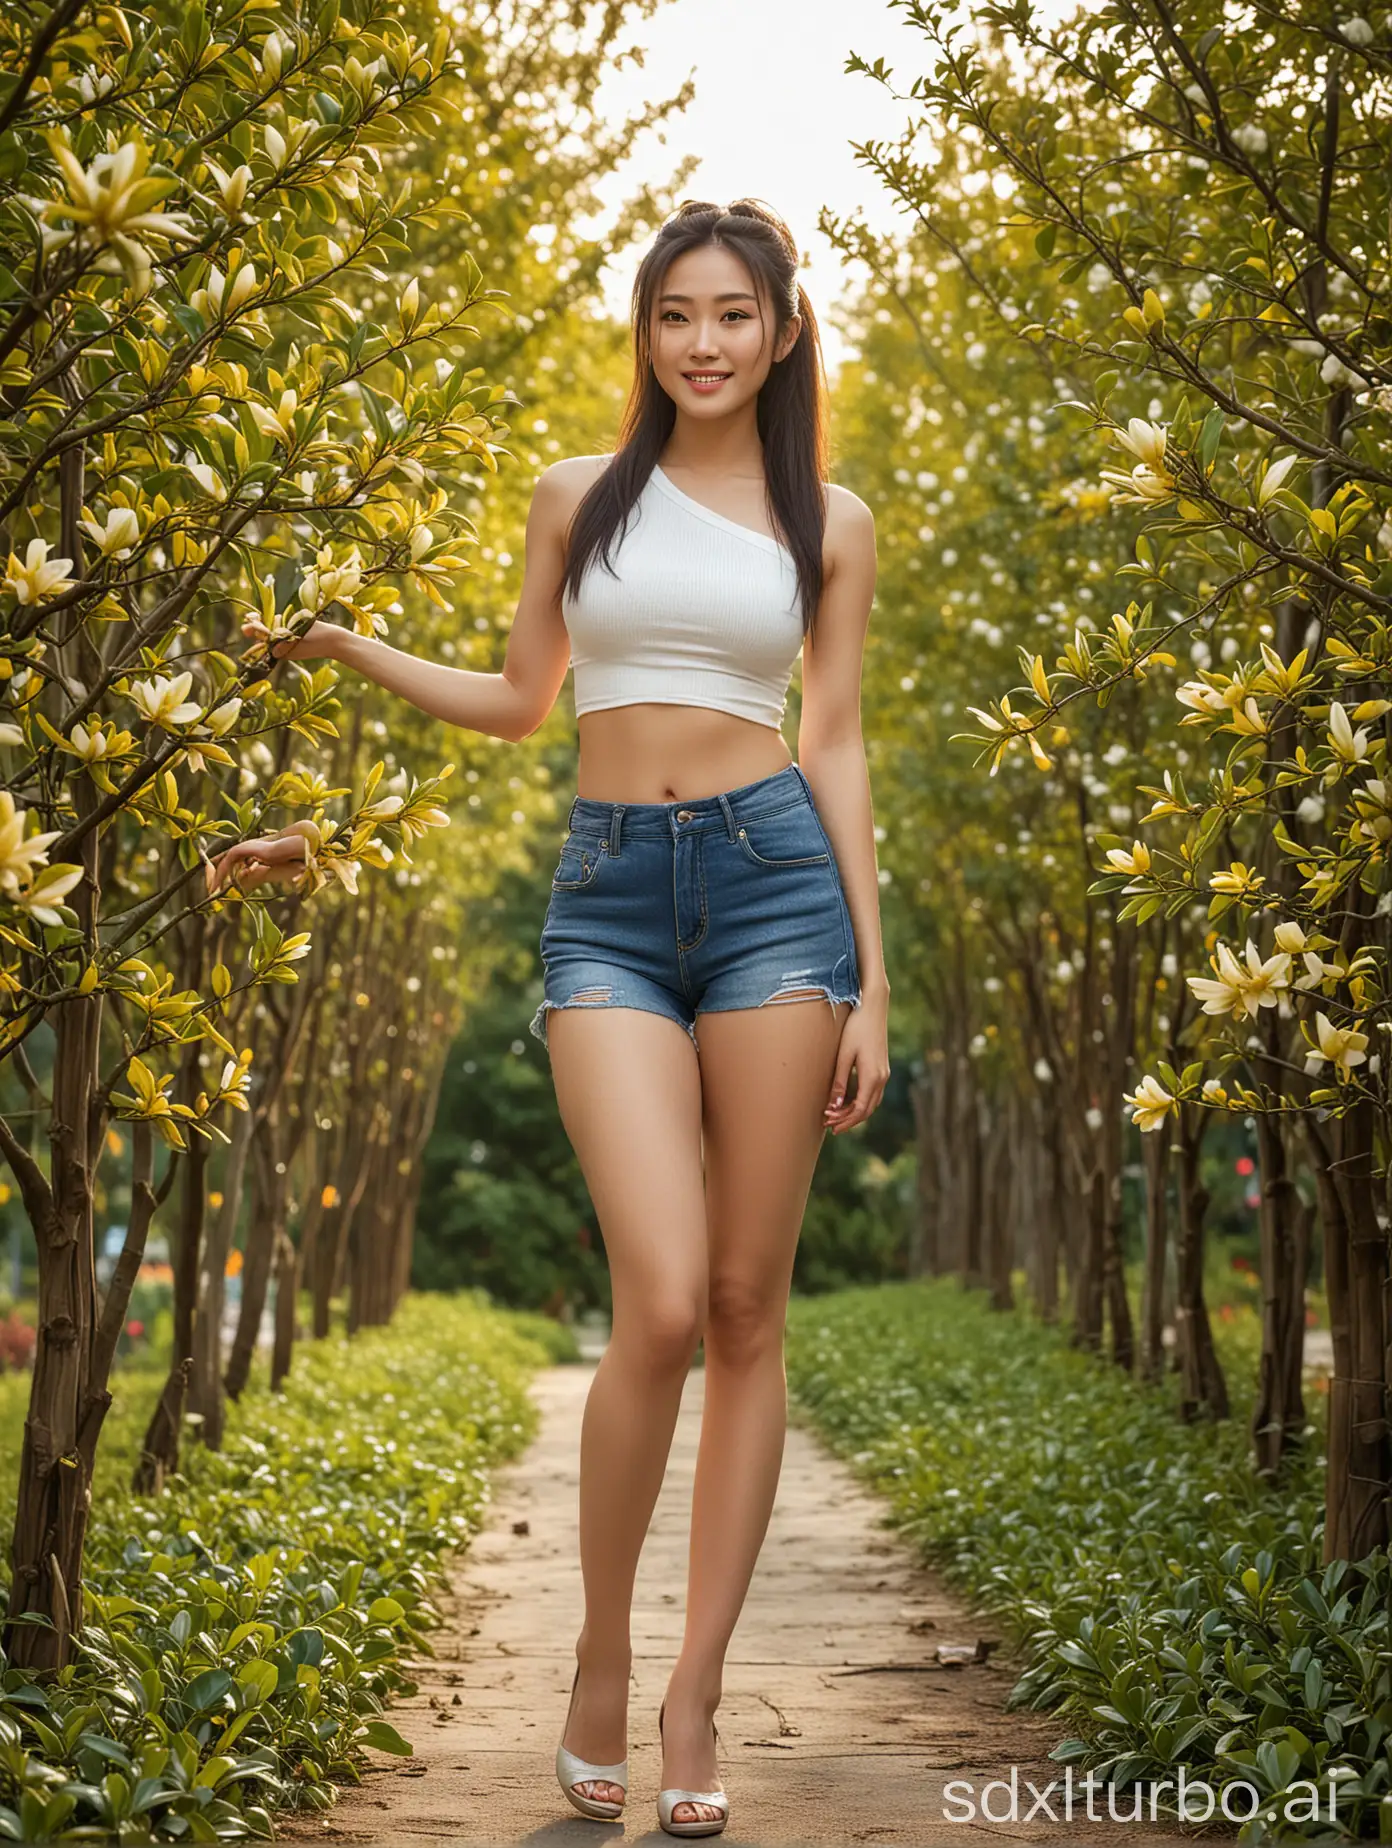 32 year old Chinese woman, 173 cm tall, 68 kg weight, beautiful and elegant facial features, fair skin, tall and athletic build, well-proportioned, has a little abs, perfect hourglass figure, golden ratio body shape, medium long hair, diagonal ponytail, white cropped top, light blue denim shorts, legs in black high heels with red soles, sweat marks on face and body. Full body, barefoot, background: tall green magnolia tree, falling magnolia flowers, Osmanthus tree, sunset sky, colorful clouds. Tall cornstalks, taller or as tall as people. Showcasing her beauty and well-shaped physique, high quality, masterpiece, clear focus, high resolution, seductive pose, smiling back with a hundred charms. Bending over to show off her curves, rear view, emphasizing her plump and large buttocks. Long and elegant white fingers.